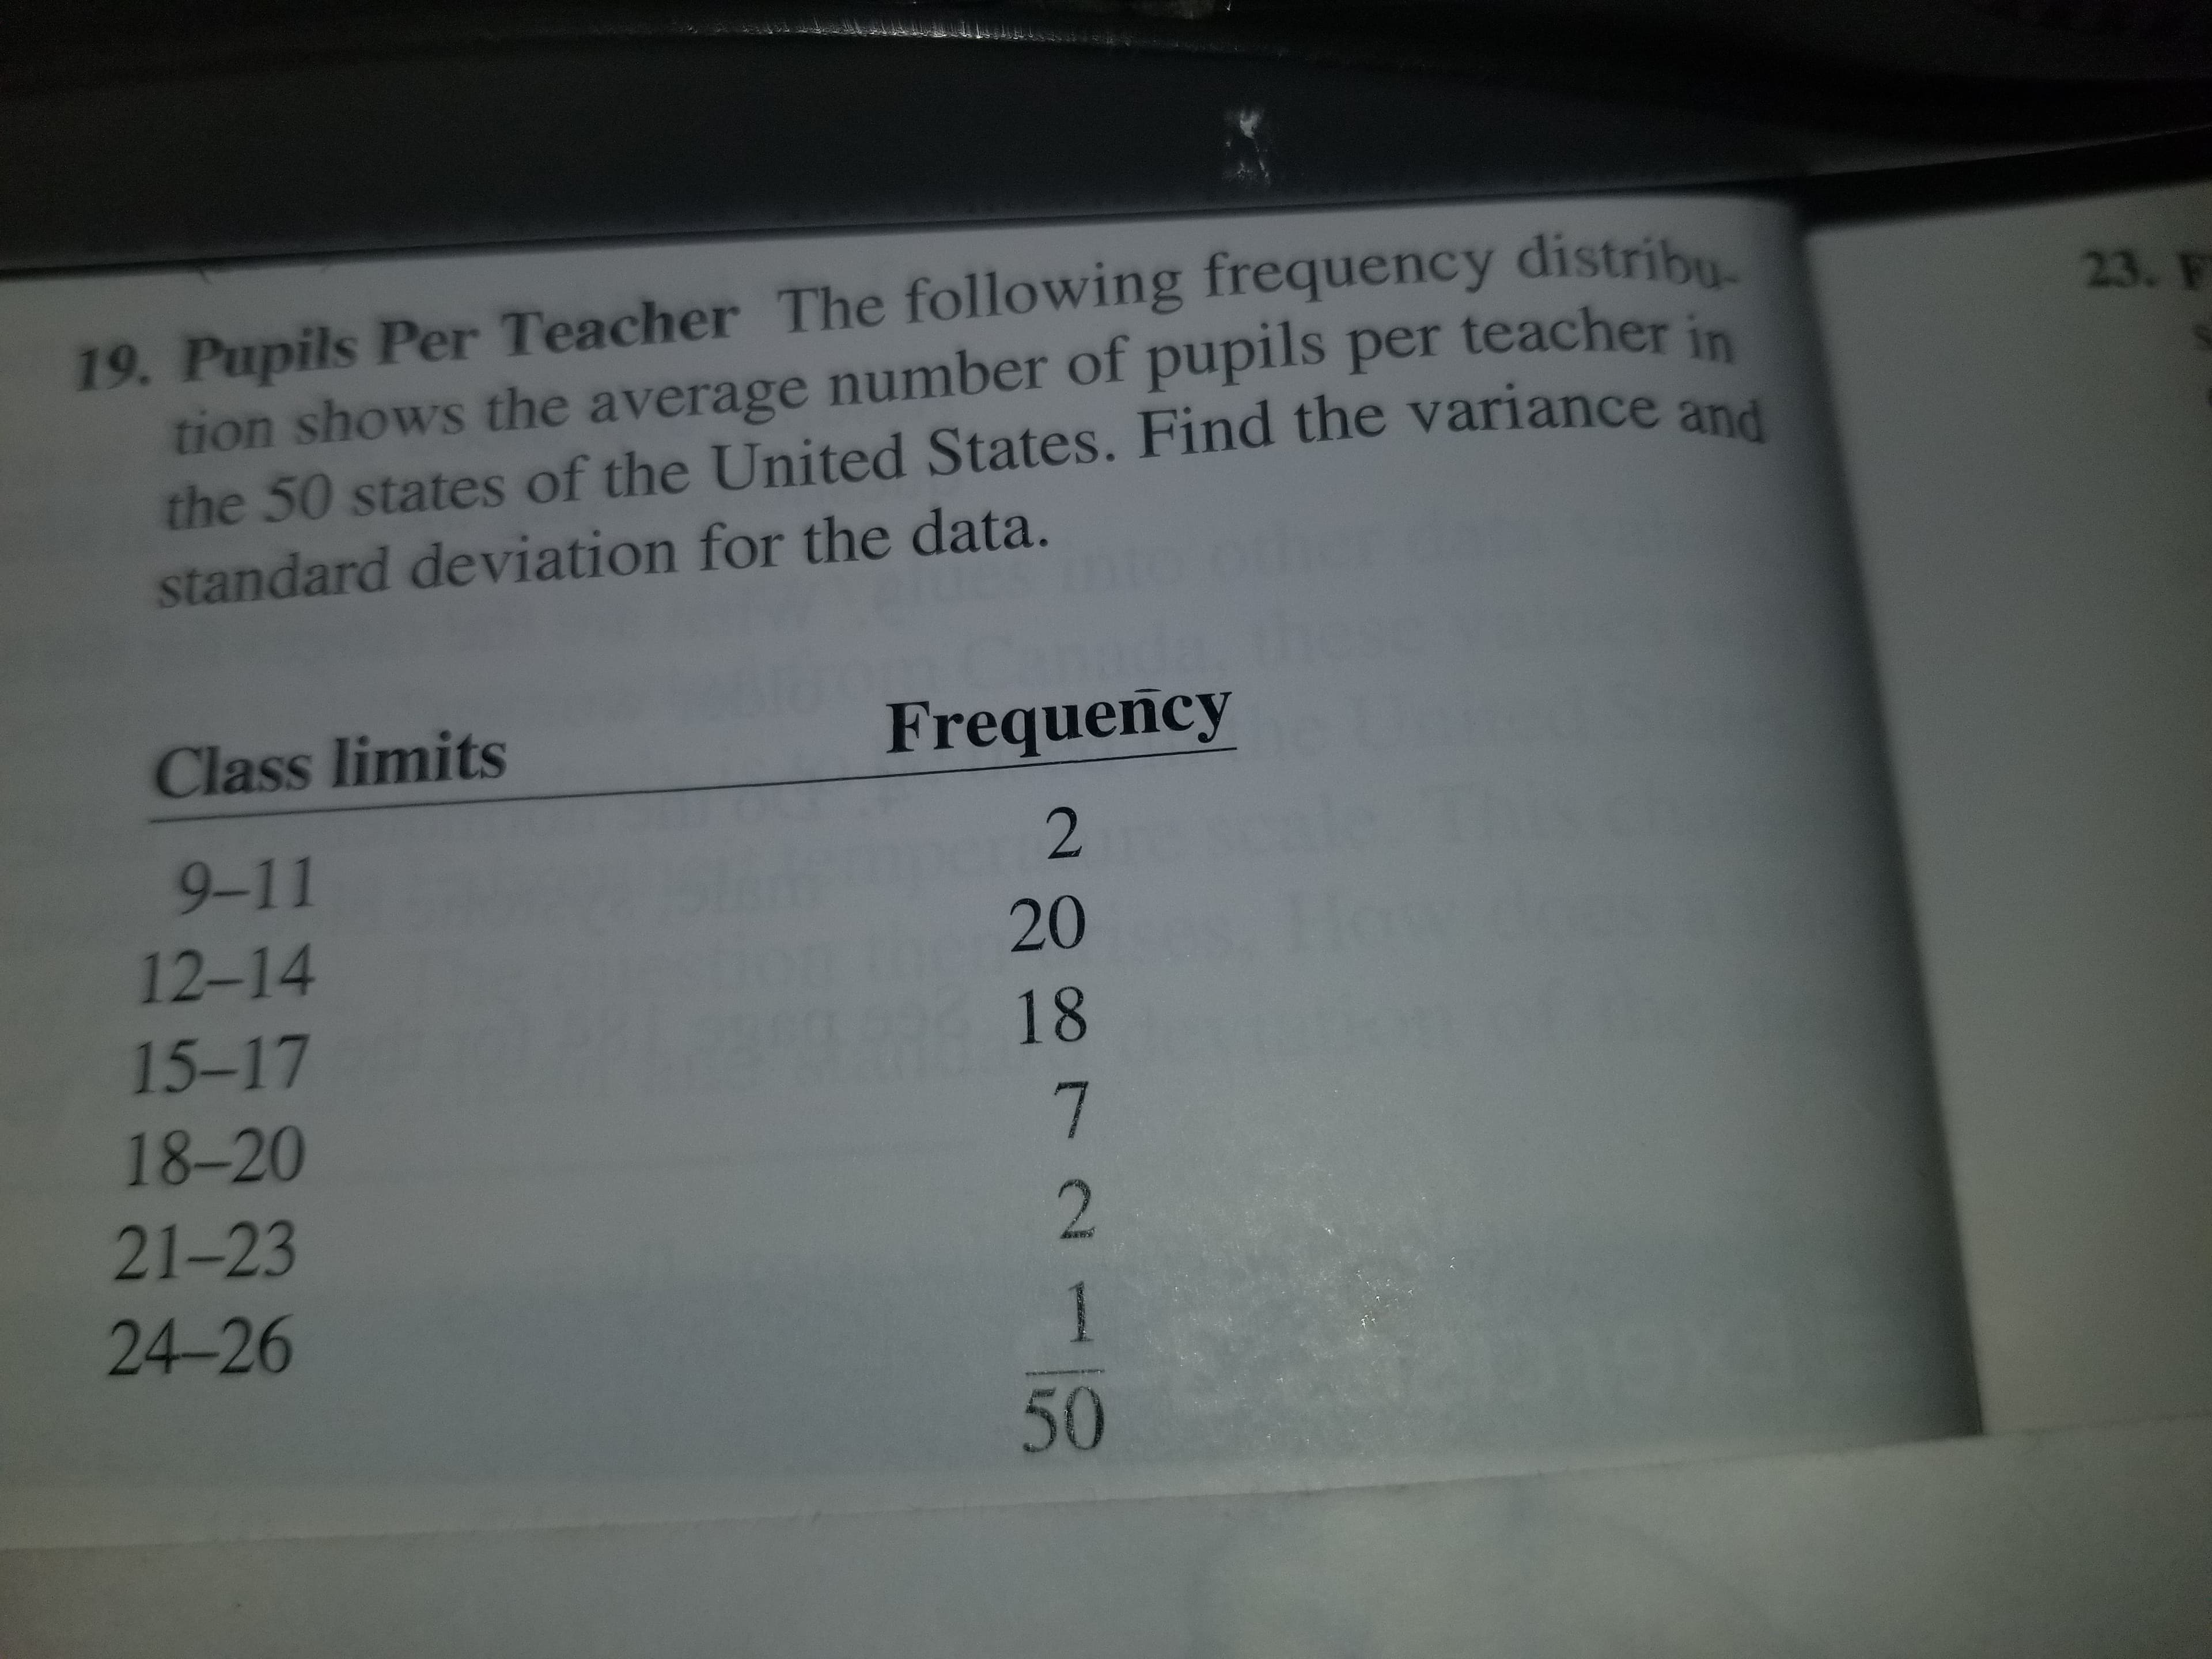 19. Pupils Per Teacher The following frequency distribu
23. F
tion shows the average number of pupils per teacher
the 50 states of the United States. Find the variance
standard deviation for the data.
and
Class limits
Frequency
9-11
12-14
15-17
18-20
21-23
24-26
20
18
50
